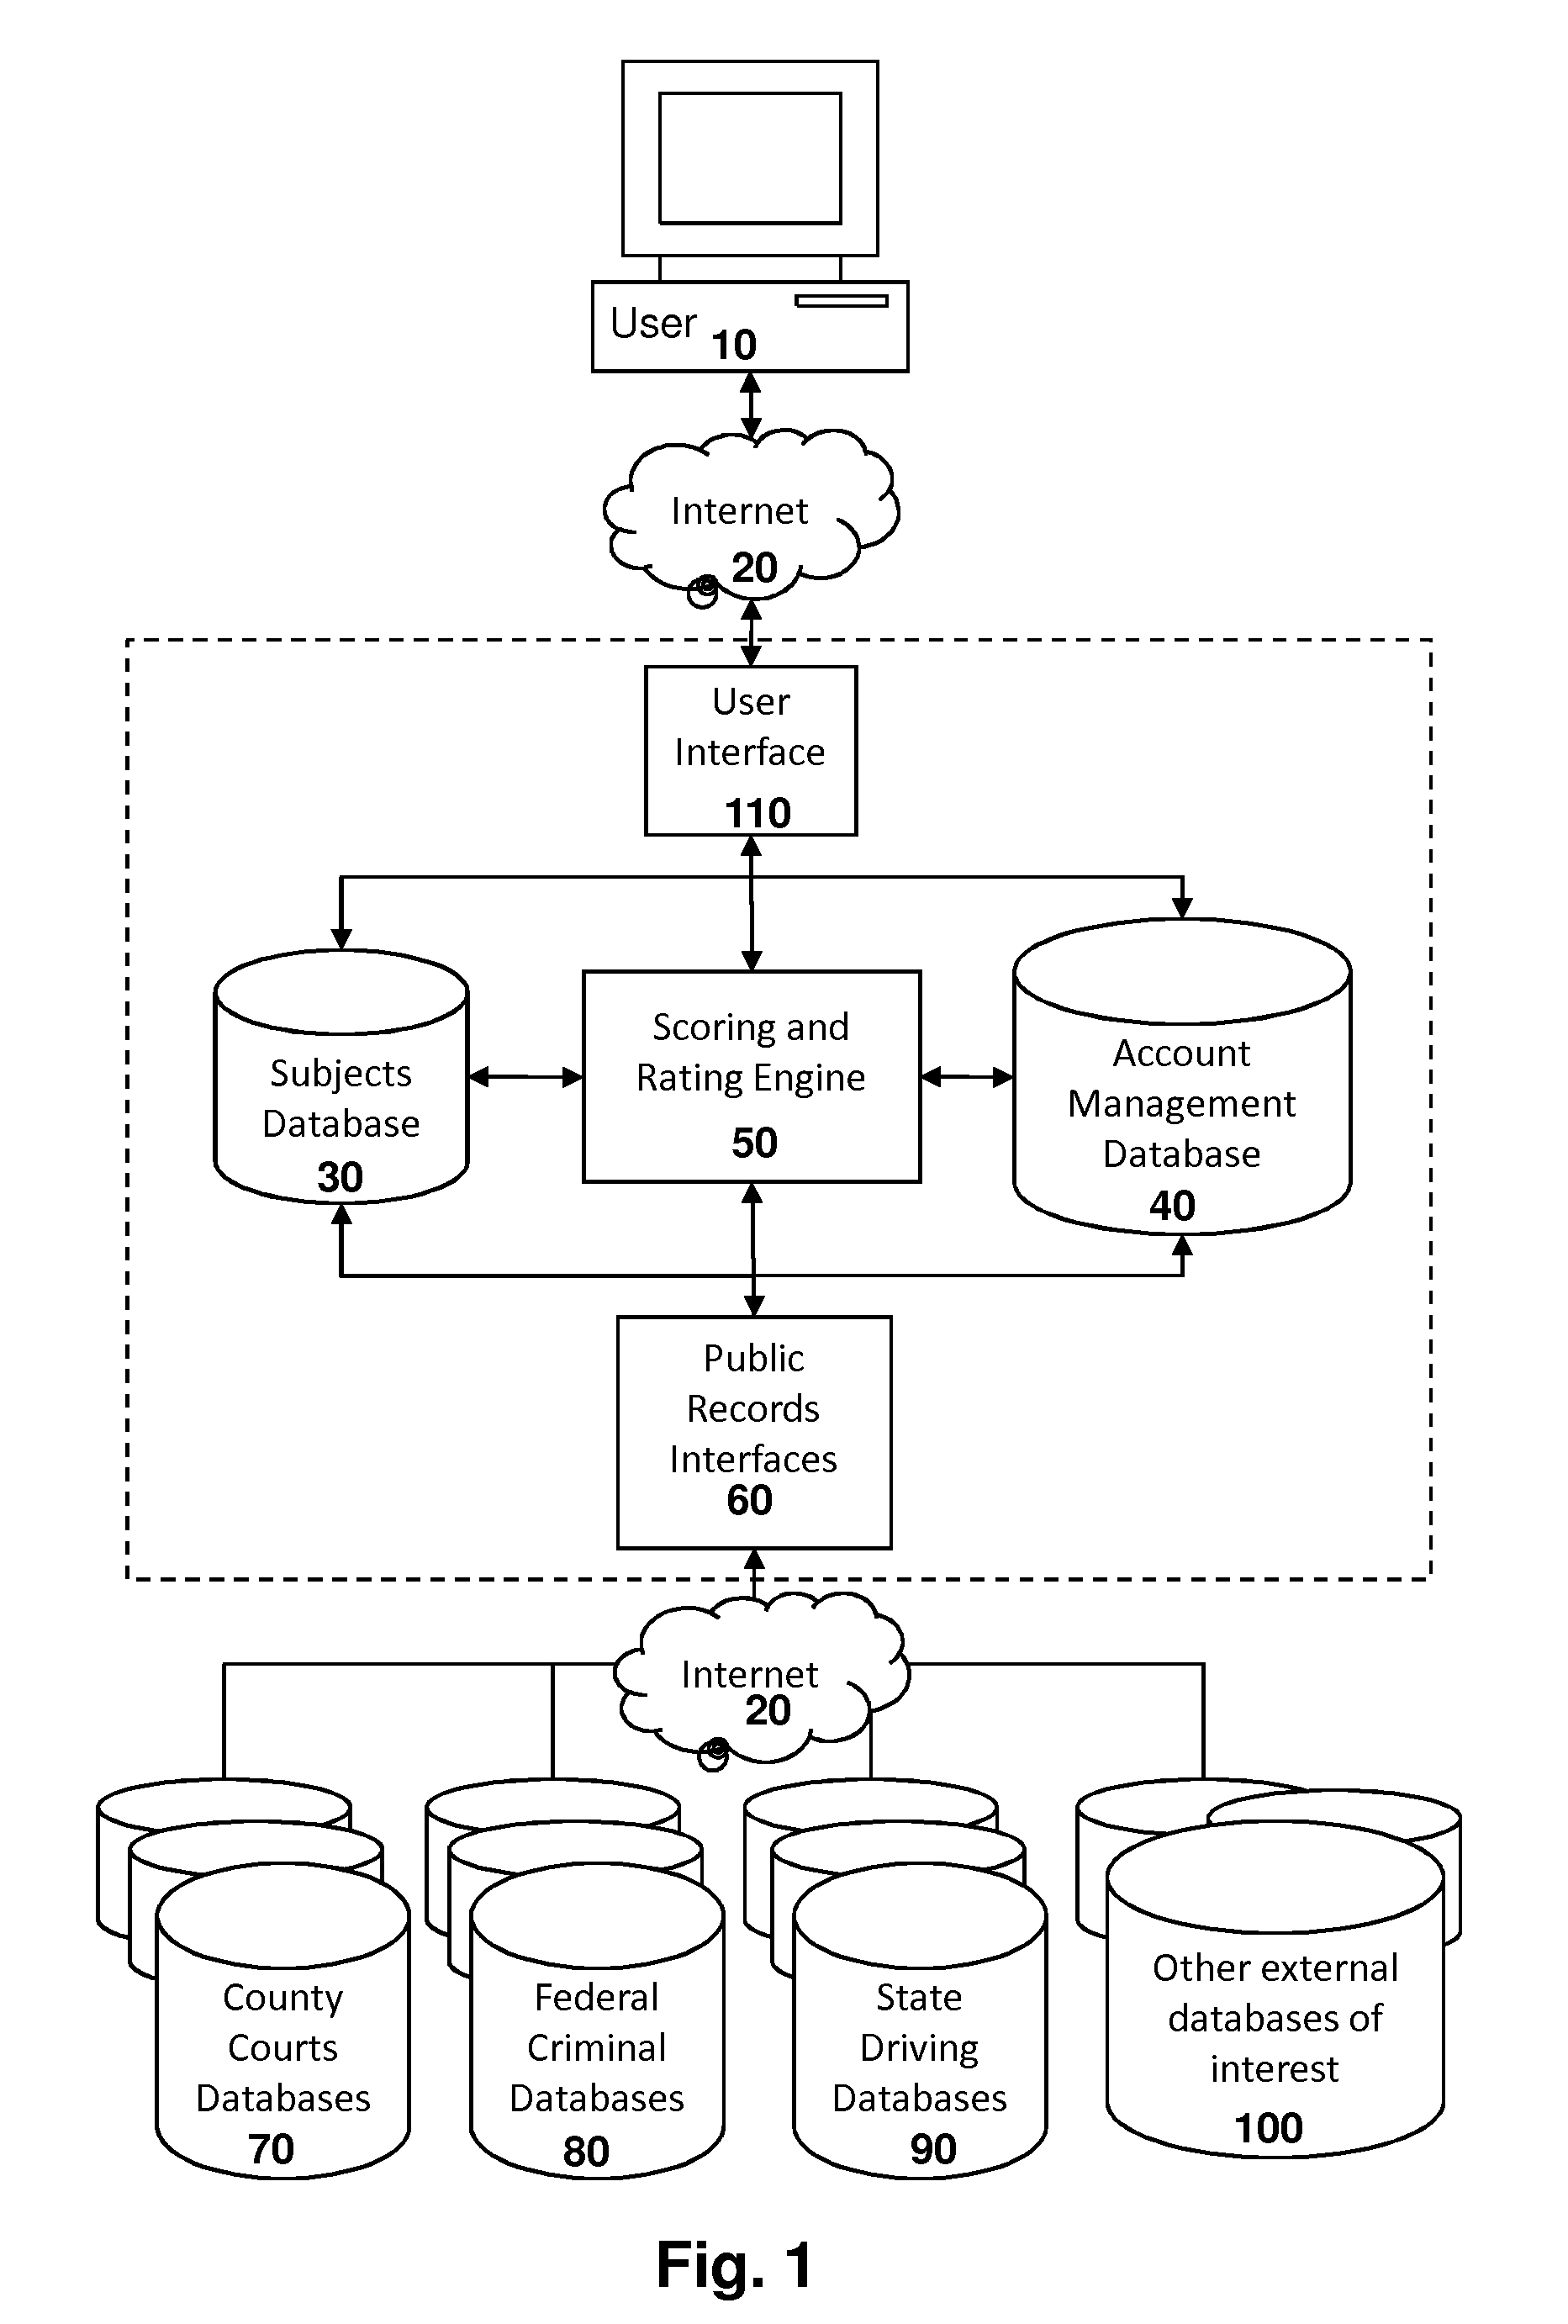 System for Conducting Persistent Periodic Common Weighted Background Investigations